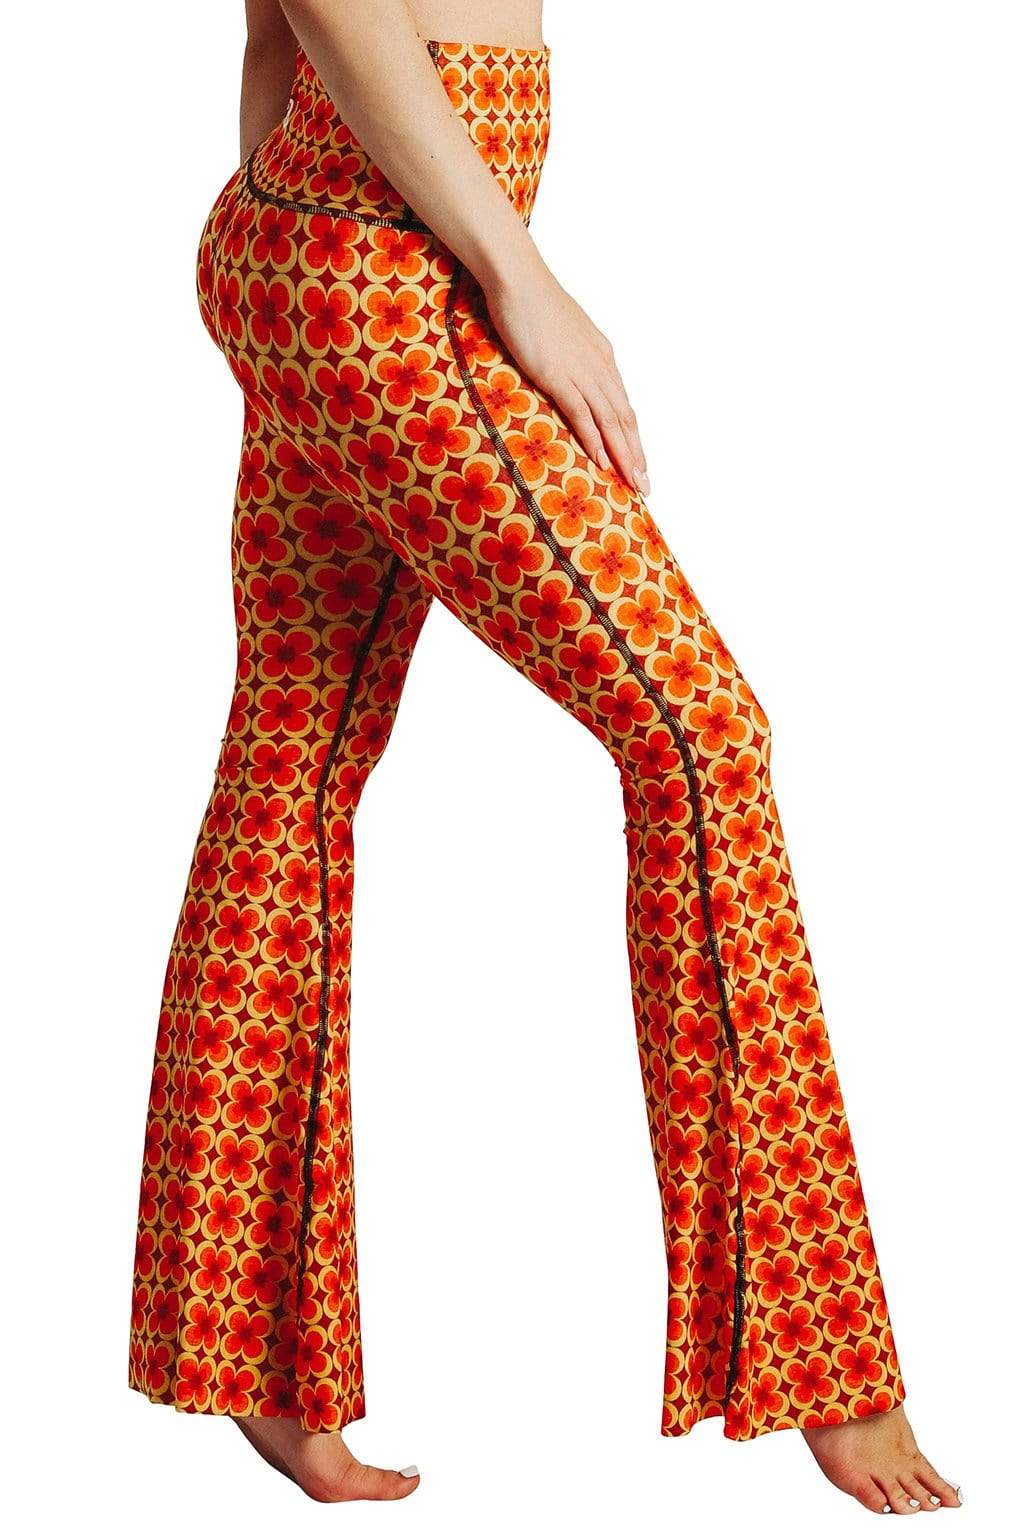 Groovy Girl Printed Bell Bottoms – DoneGood